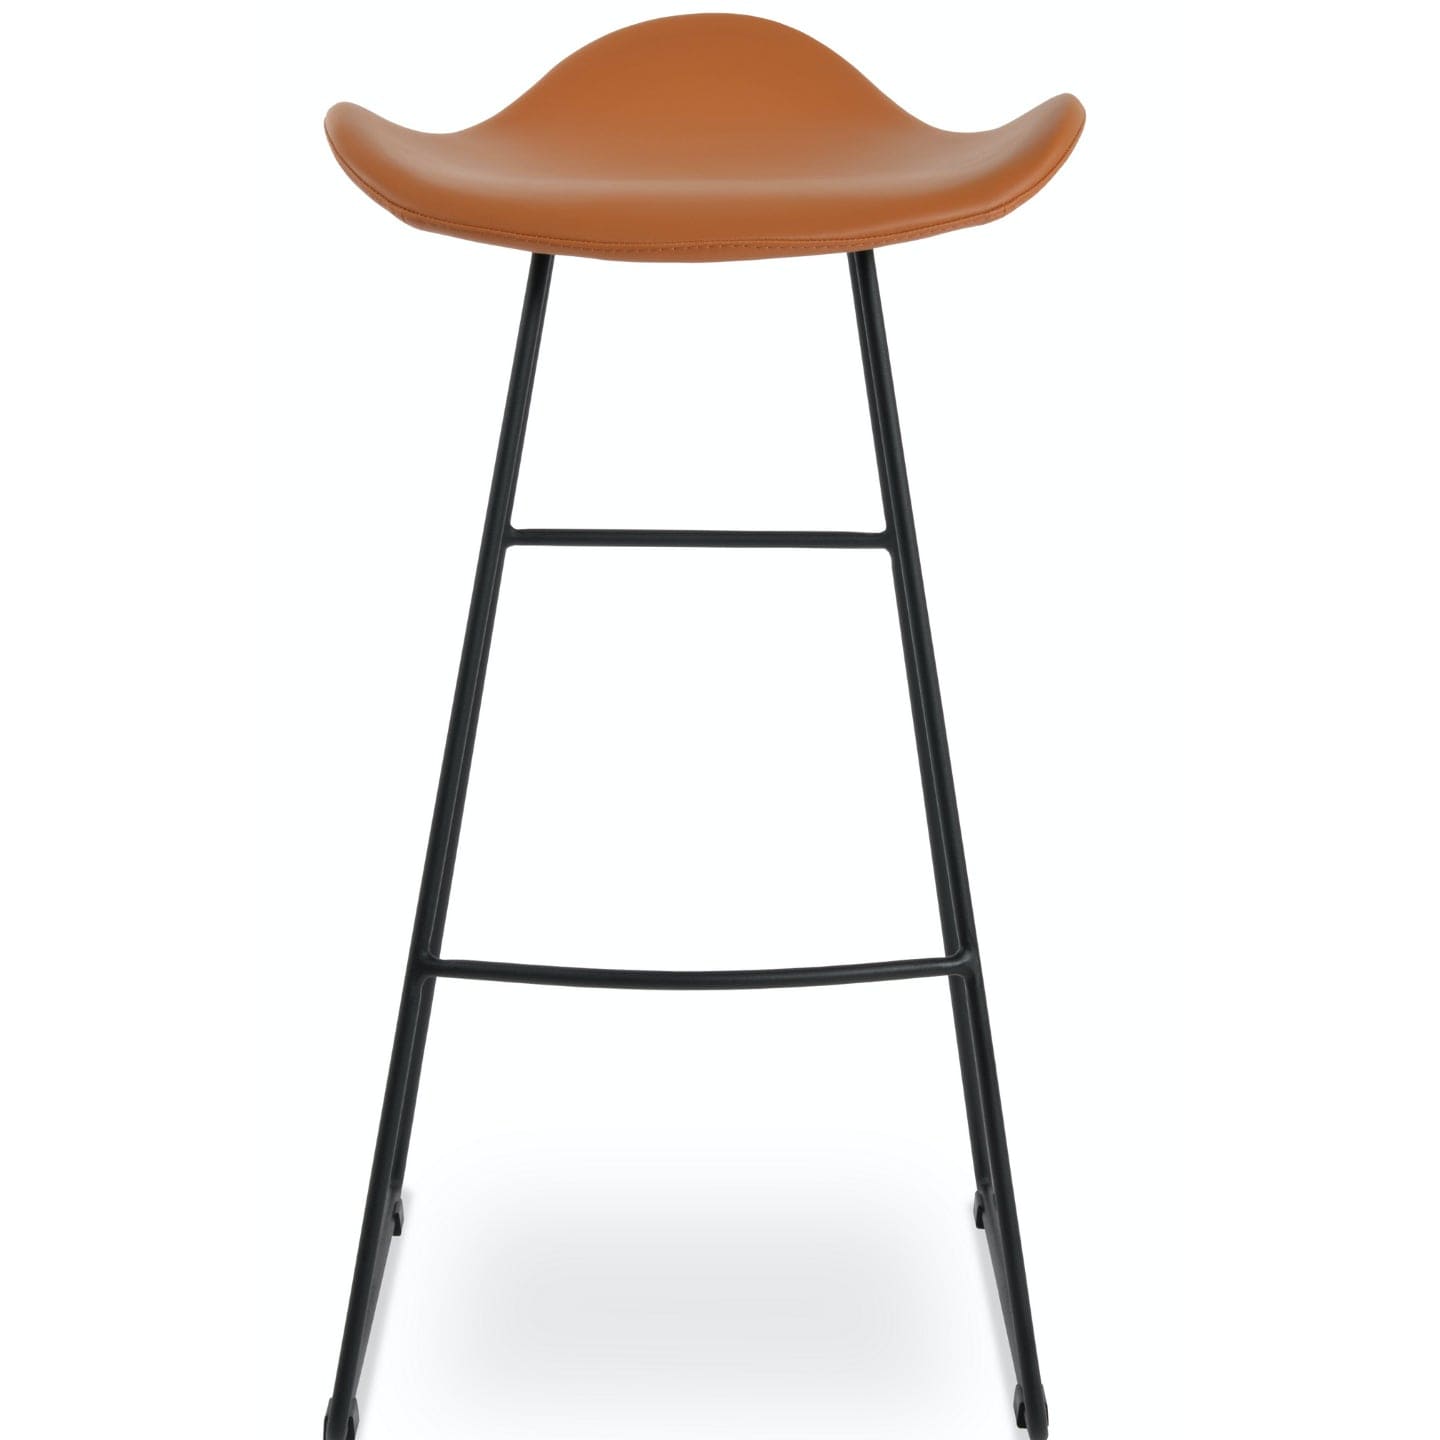 Soho Concept falcon-wire-black-metal-wire-base-faux-leather-seat-kitchen-bar-stool-in-caramel